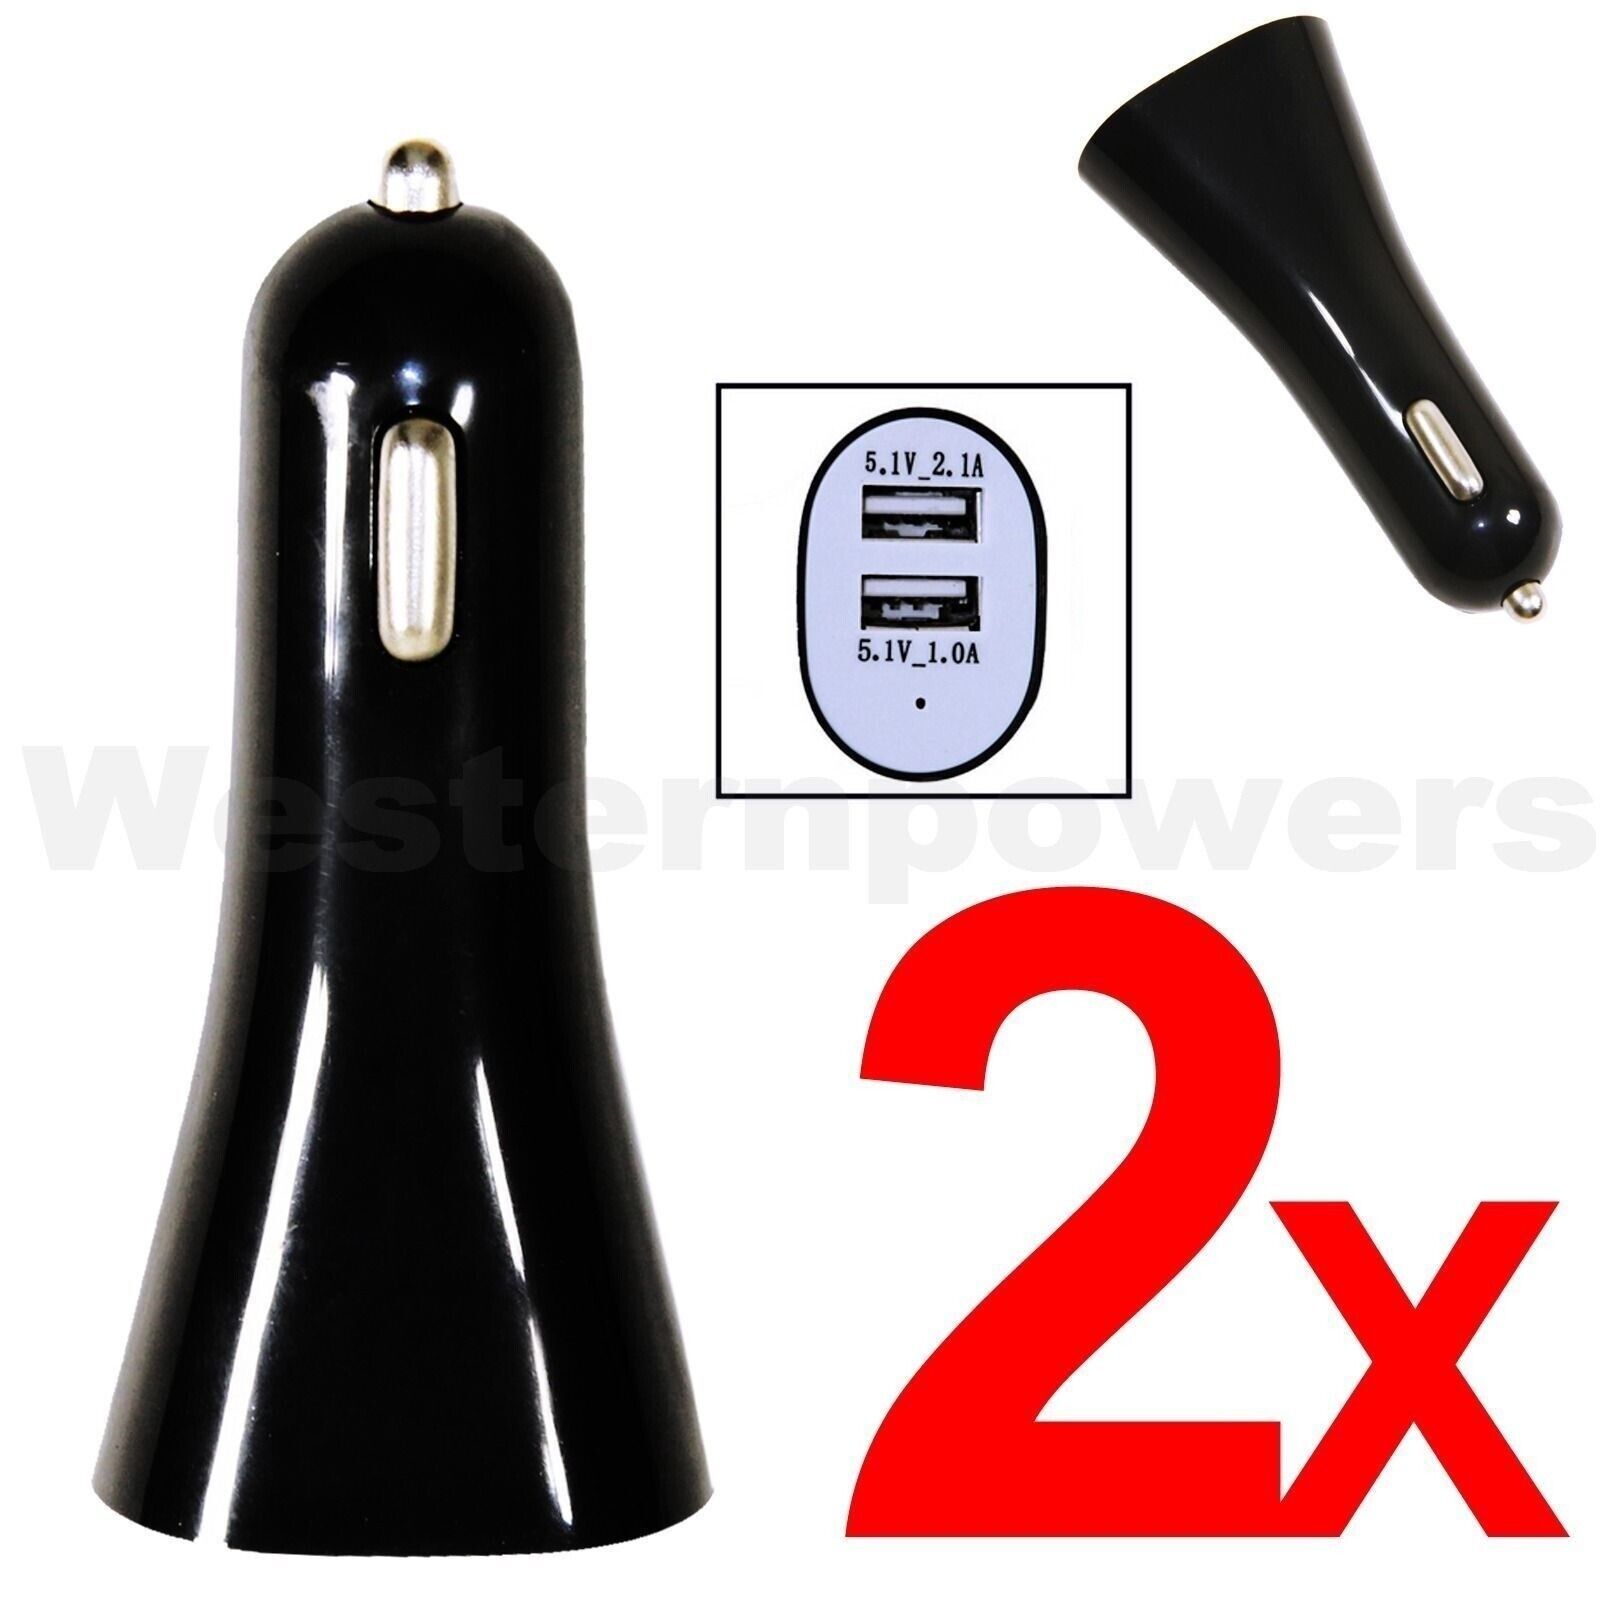 2x Black 2A 2000mA Dual USB Fast Car Charger for iPhone 5 4S iPad 2 3 4 Samsung